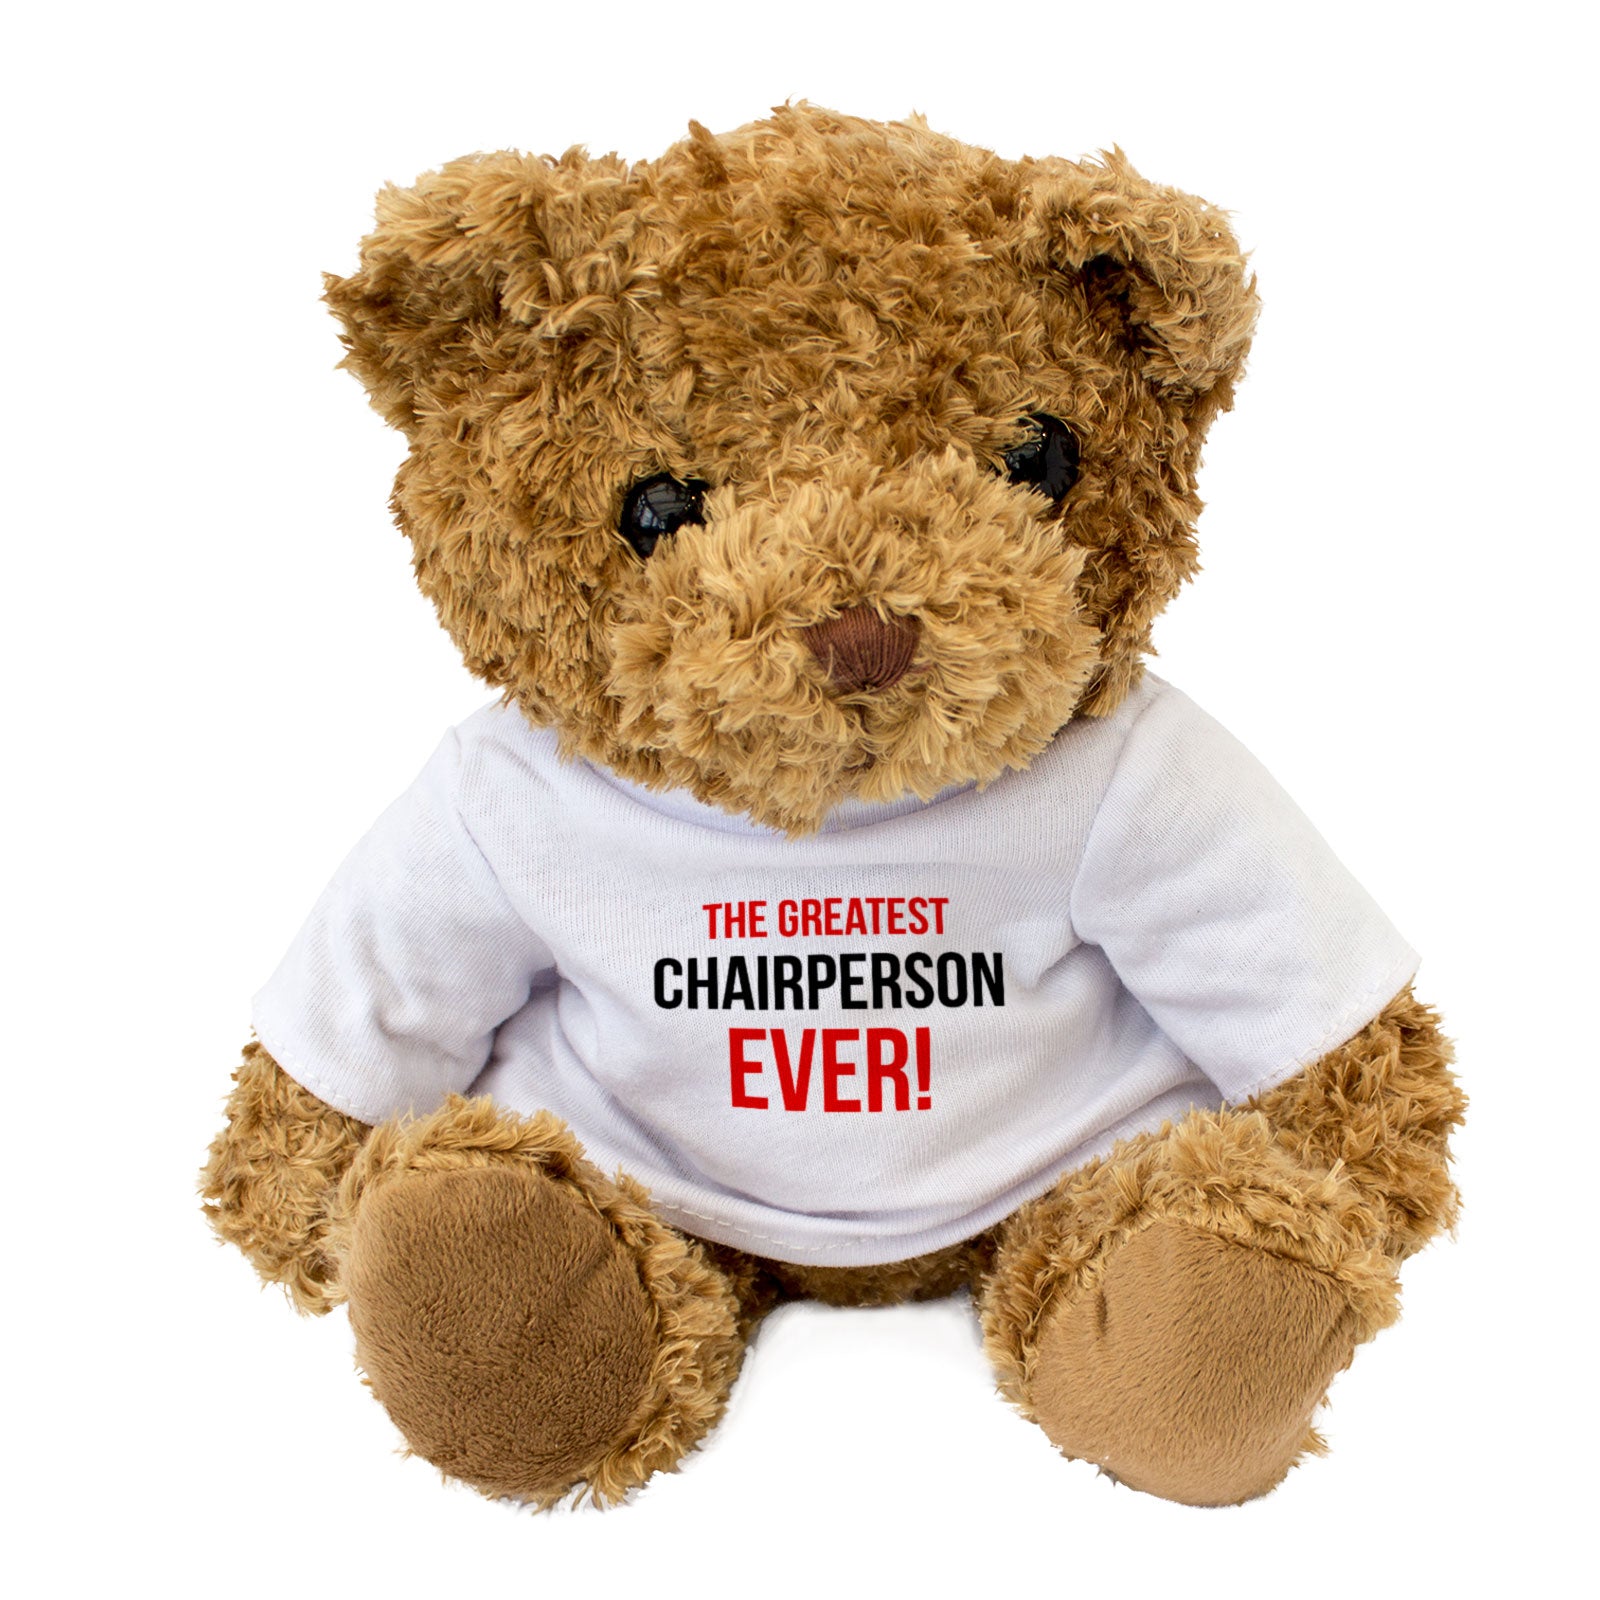 The Greatest Chairperson Ever - Teddy Bear